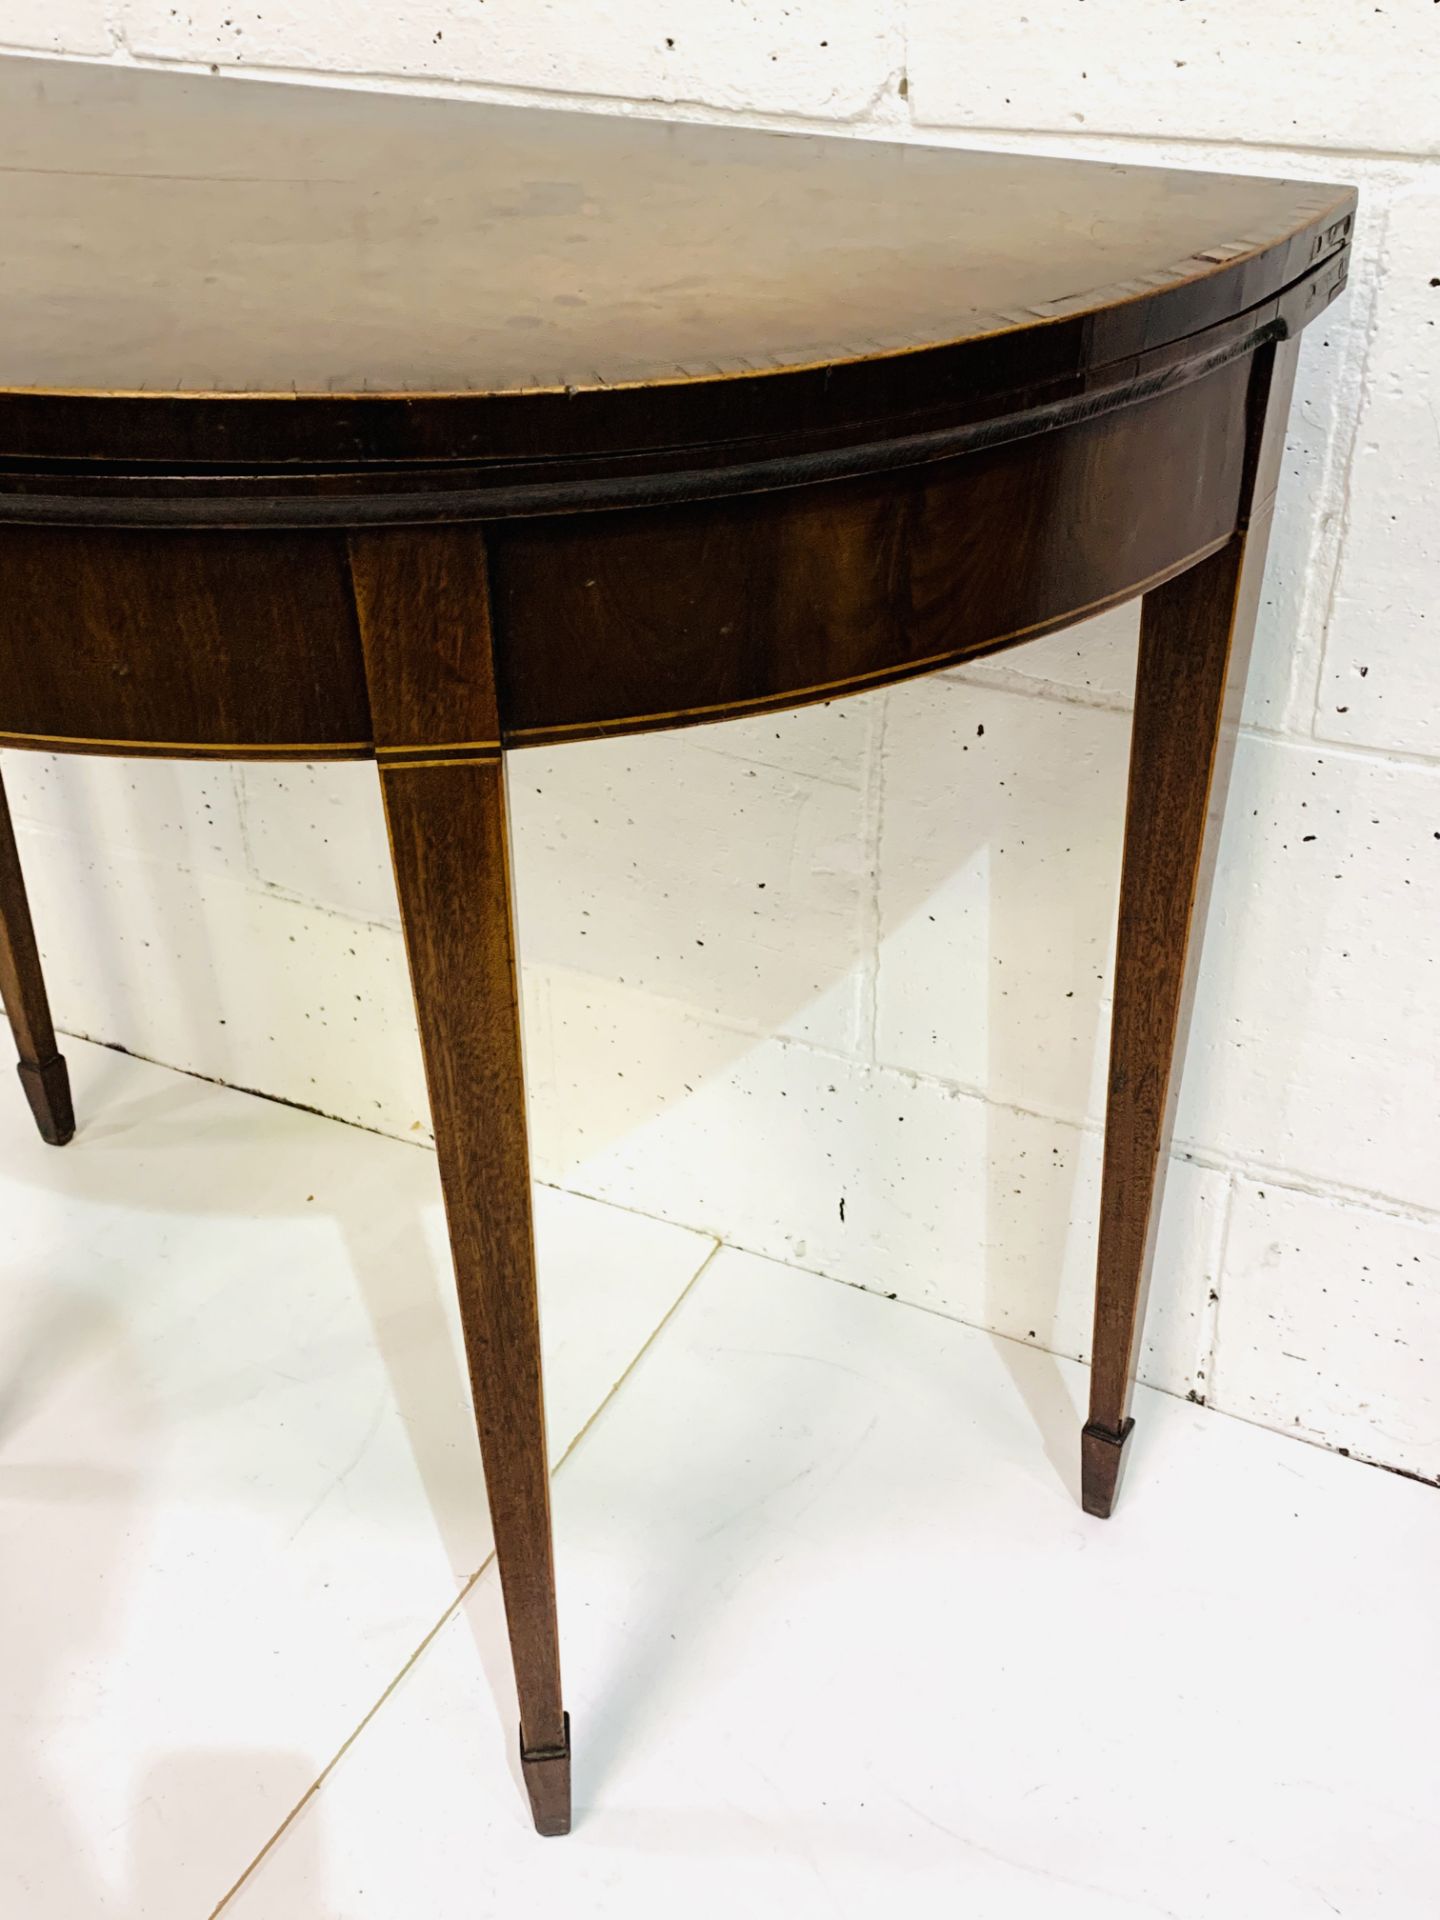 Mahogany demi-lune gate legged card table with scarlet baize, on tapered legs. - Image 2 of 3